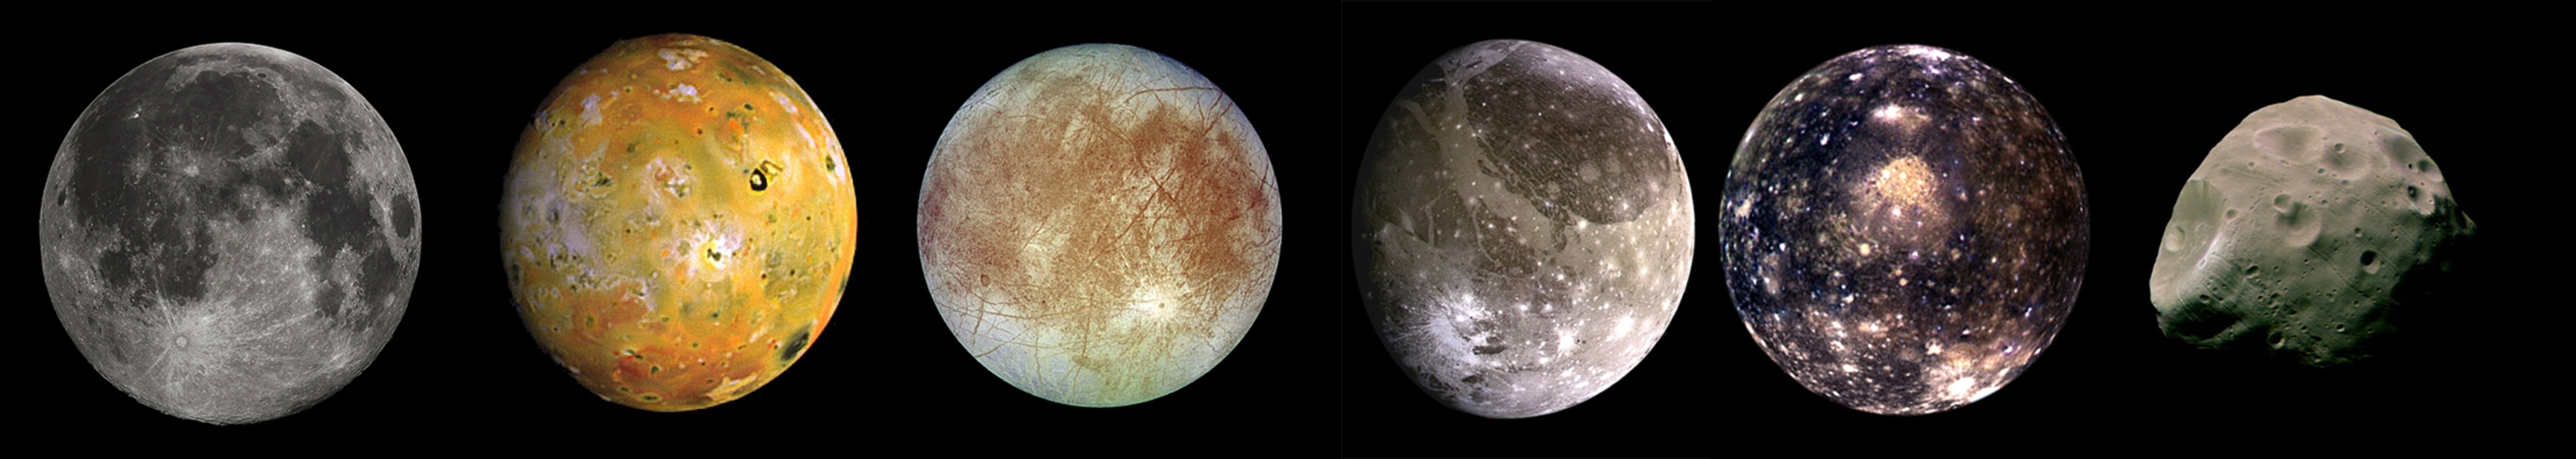 Examples of moons in the Solar System